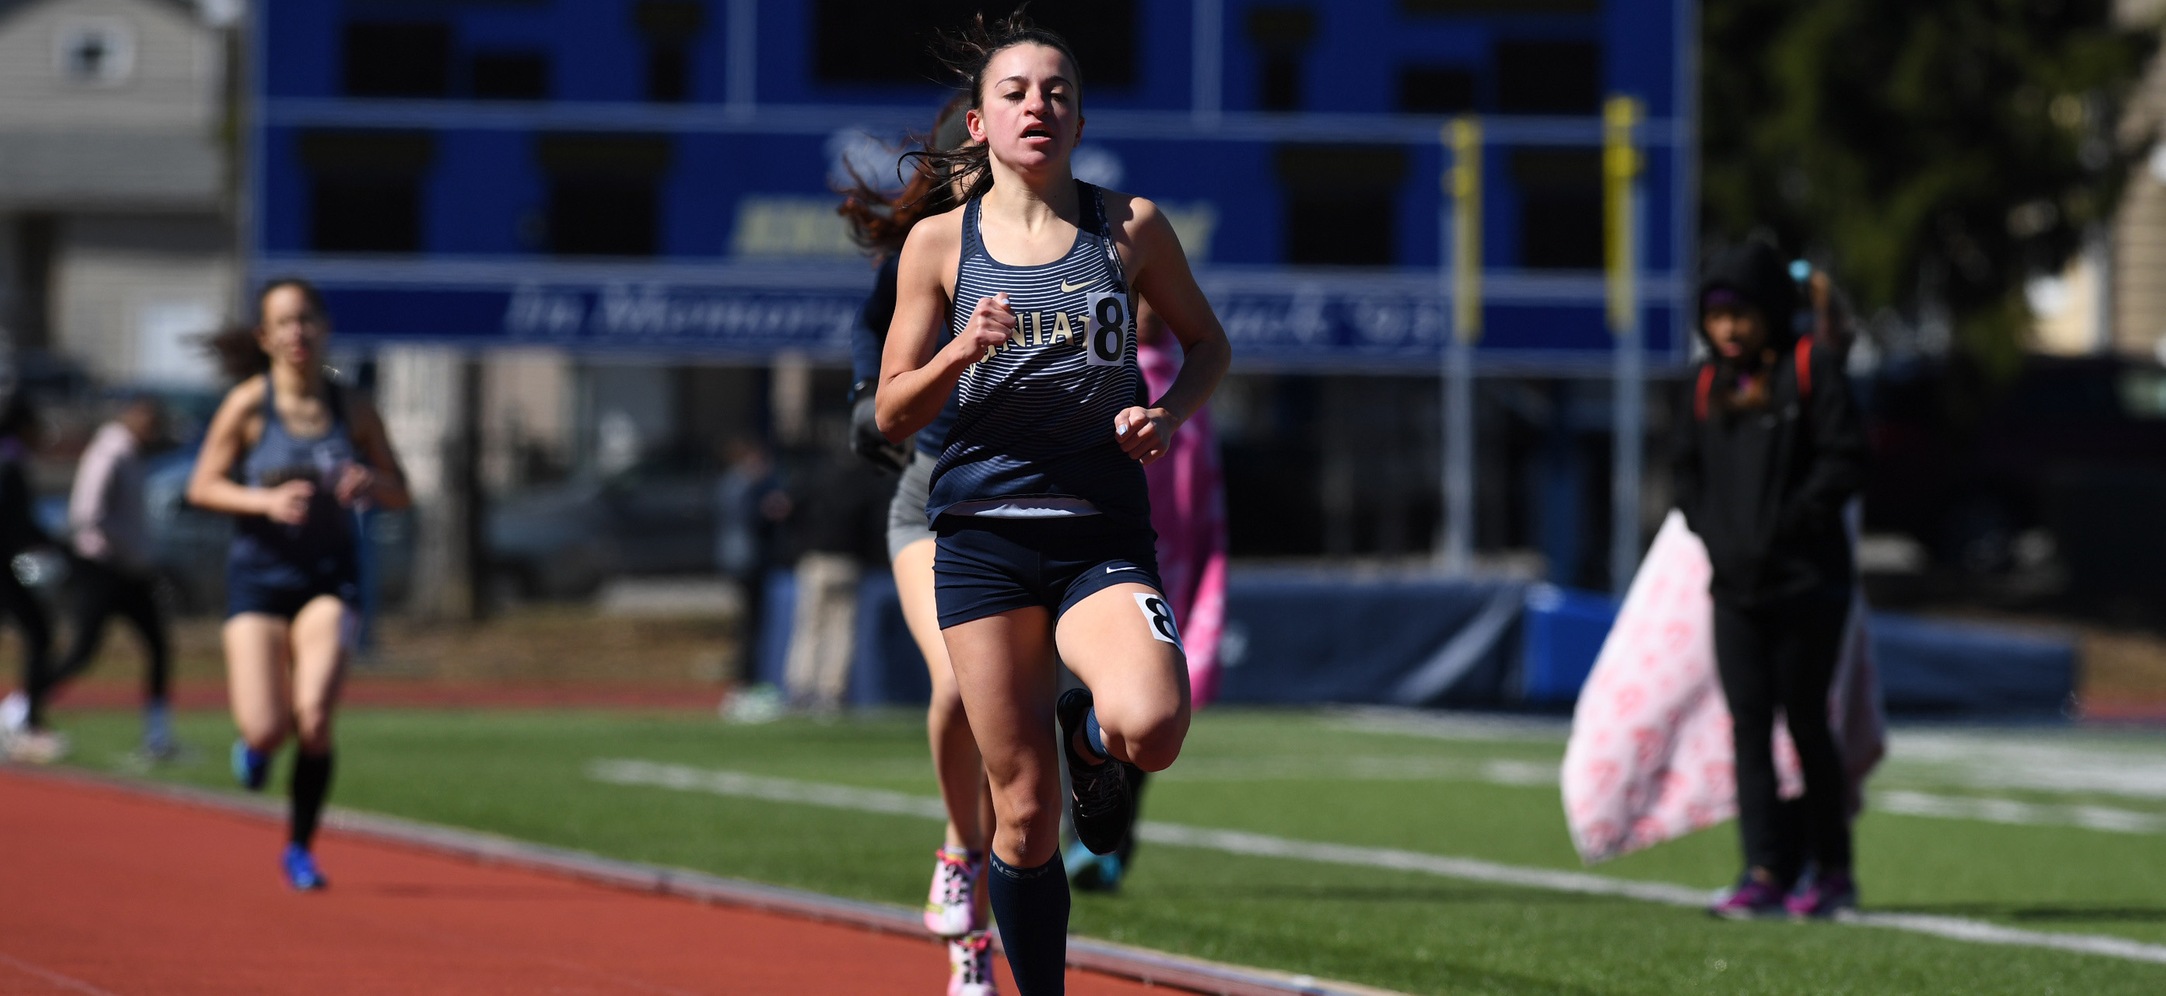 Kalil Shatters JC 10K Record as Eagles Compete at Widener Invitational